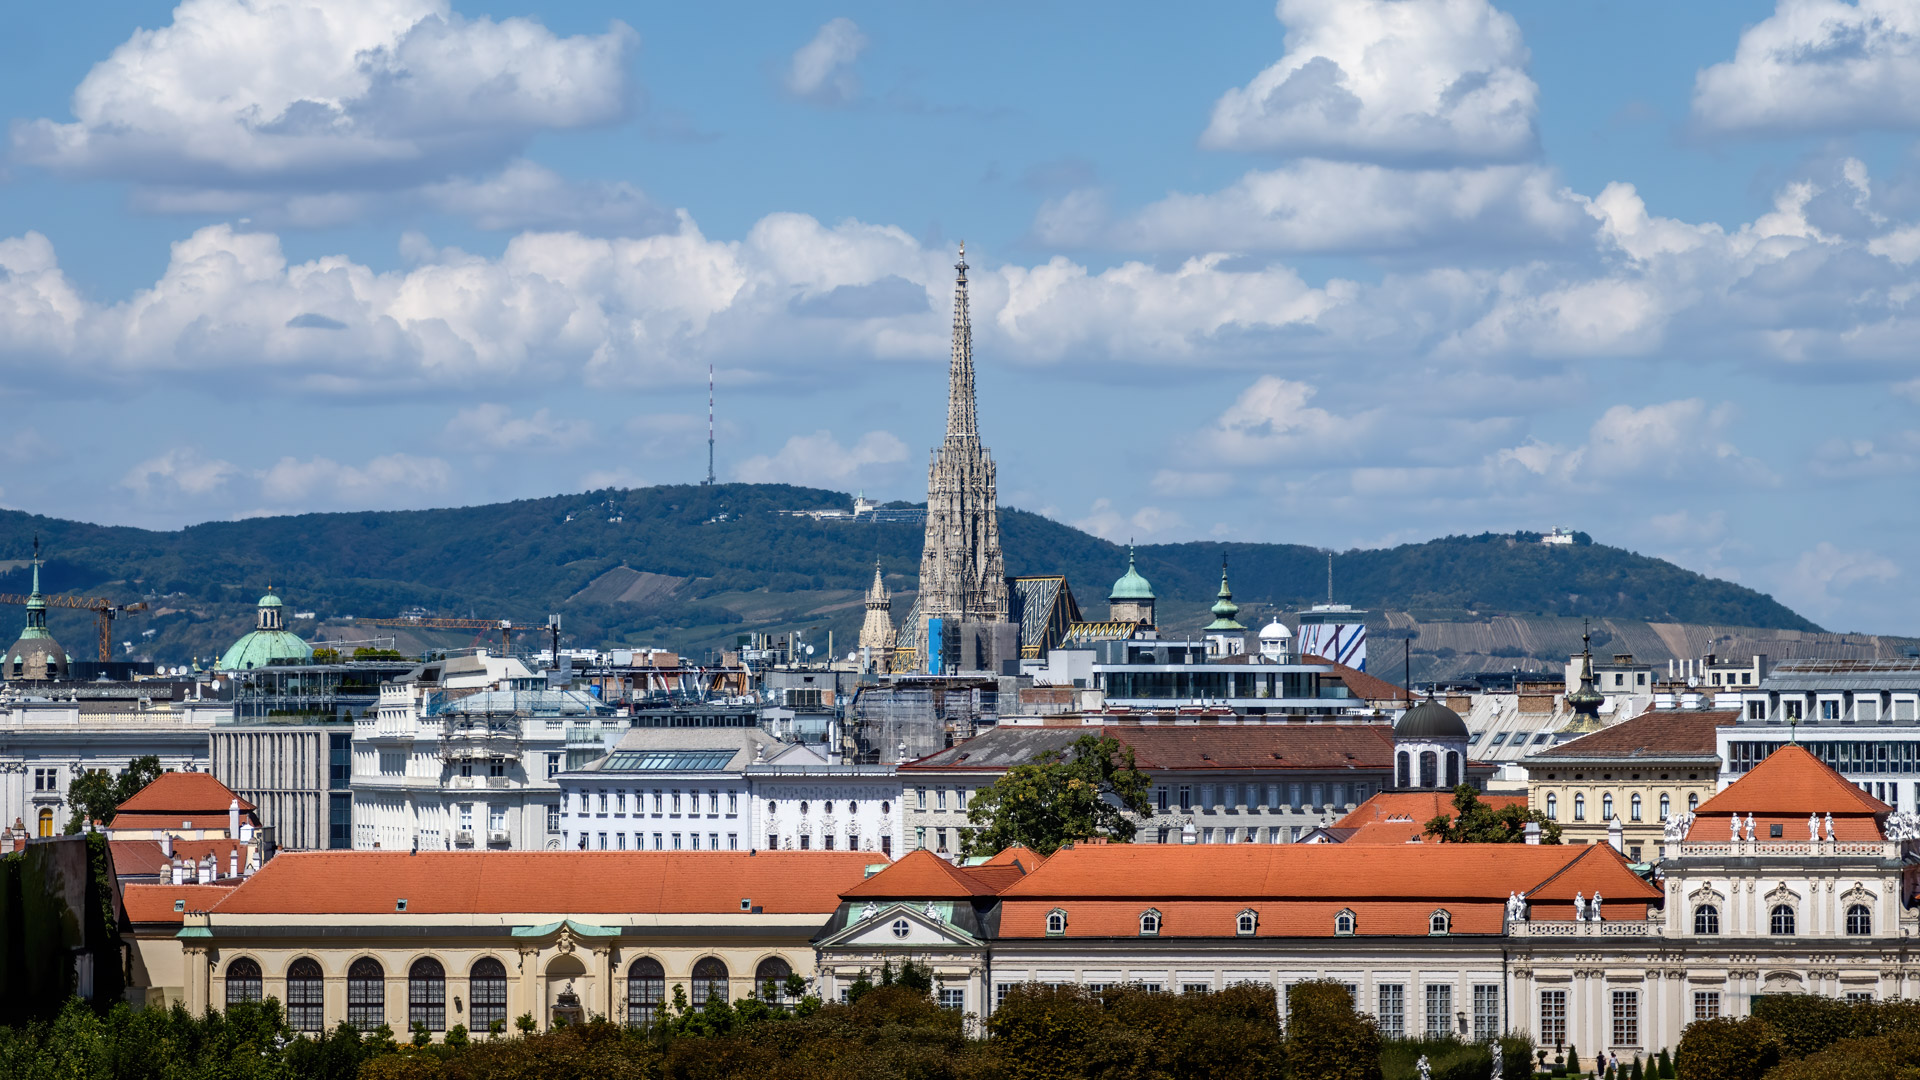 Get mesmerized by the beauty of Vienna with this HD city wallpaper. Featuring stunning views of historic landmarks and scenic spots, this wallpaper is perfect to decorate your desktop